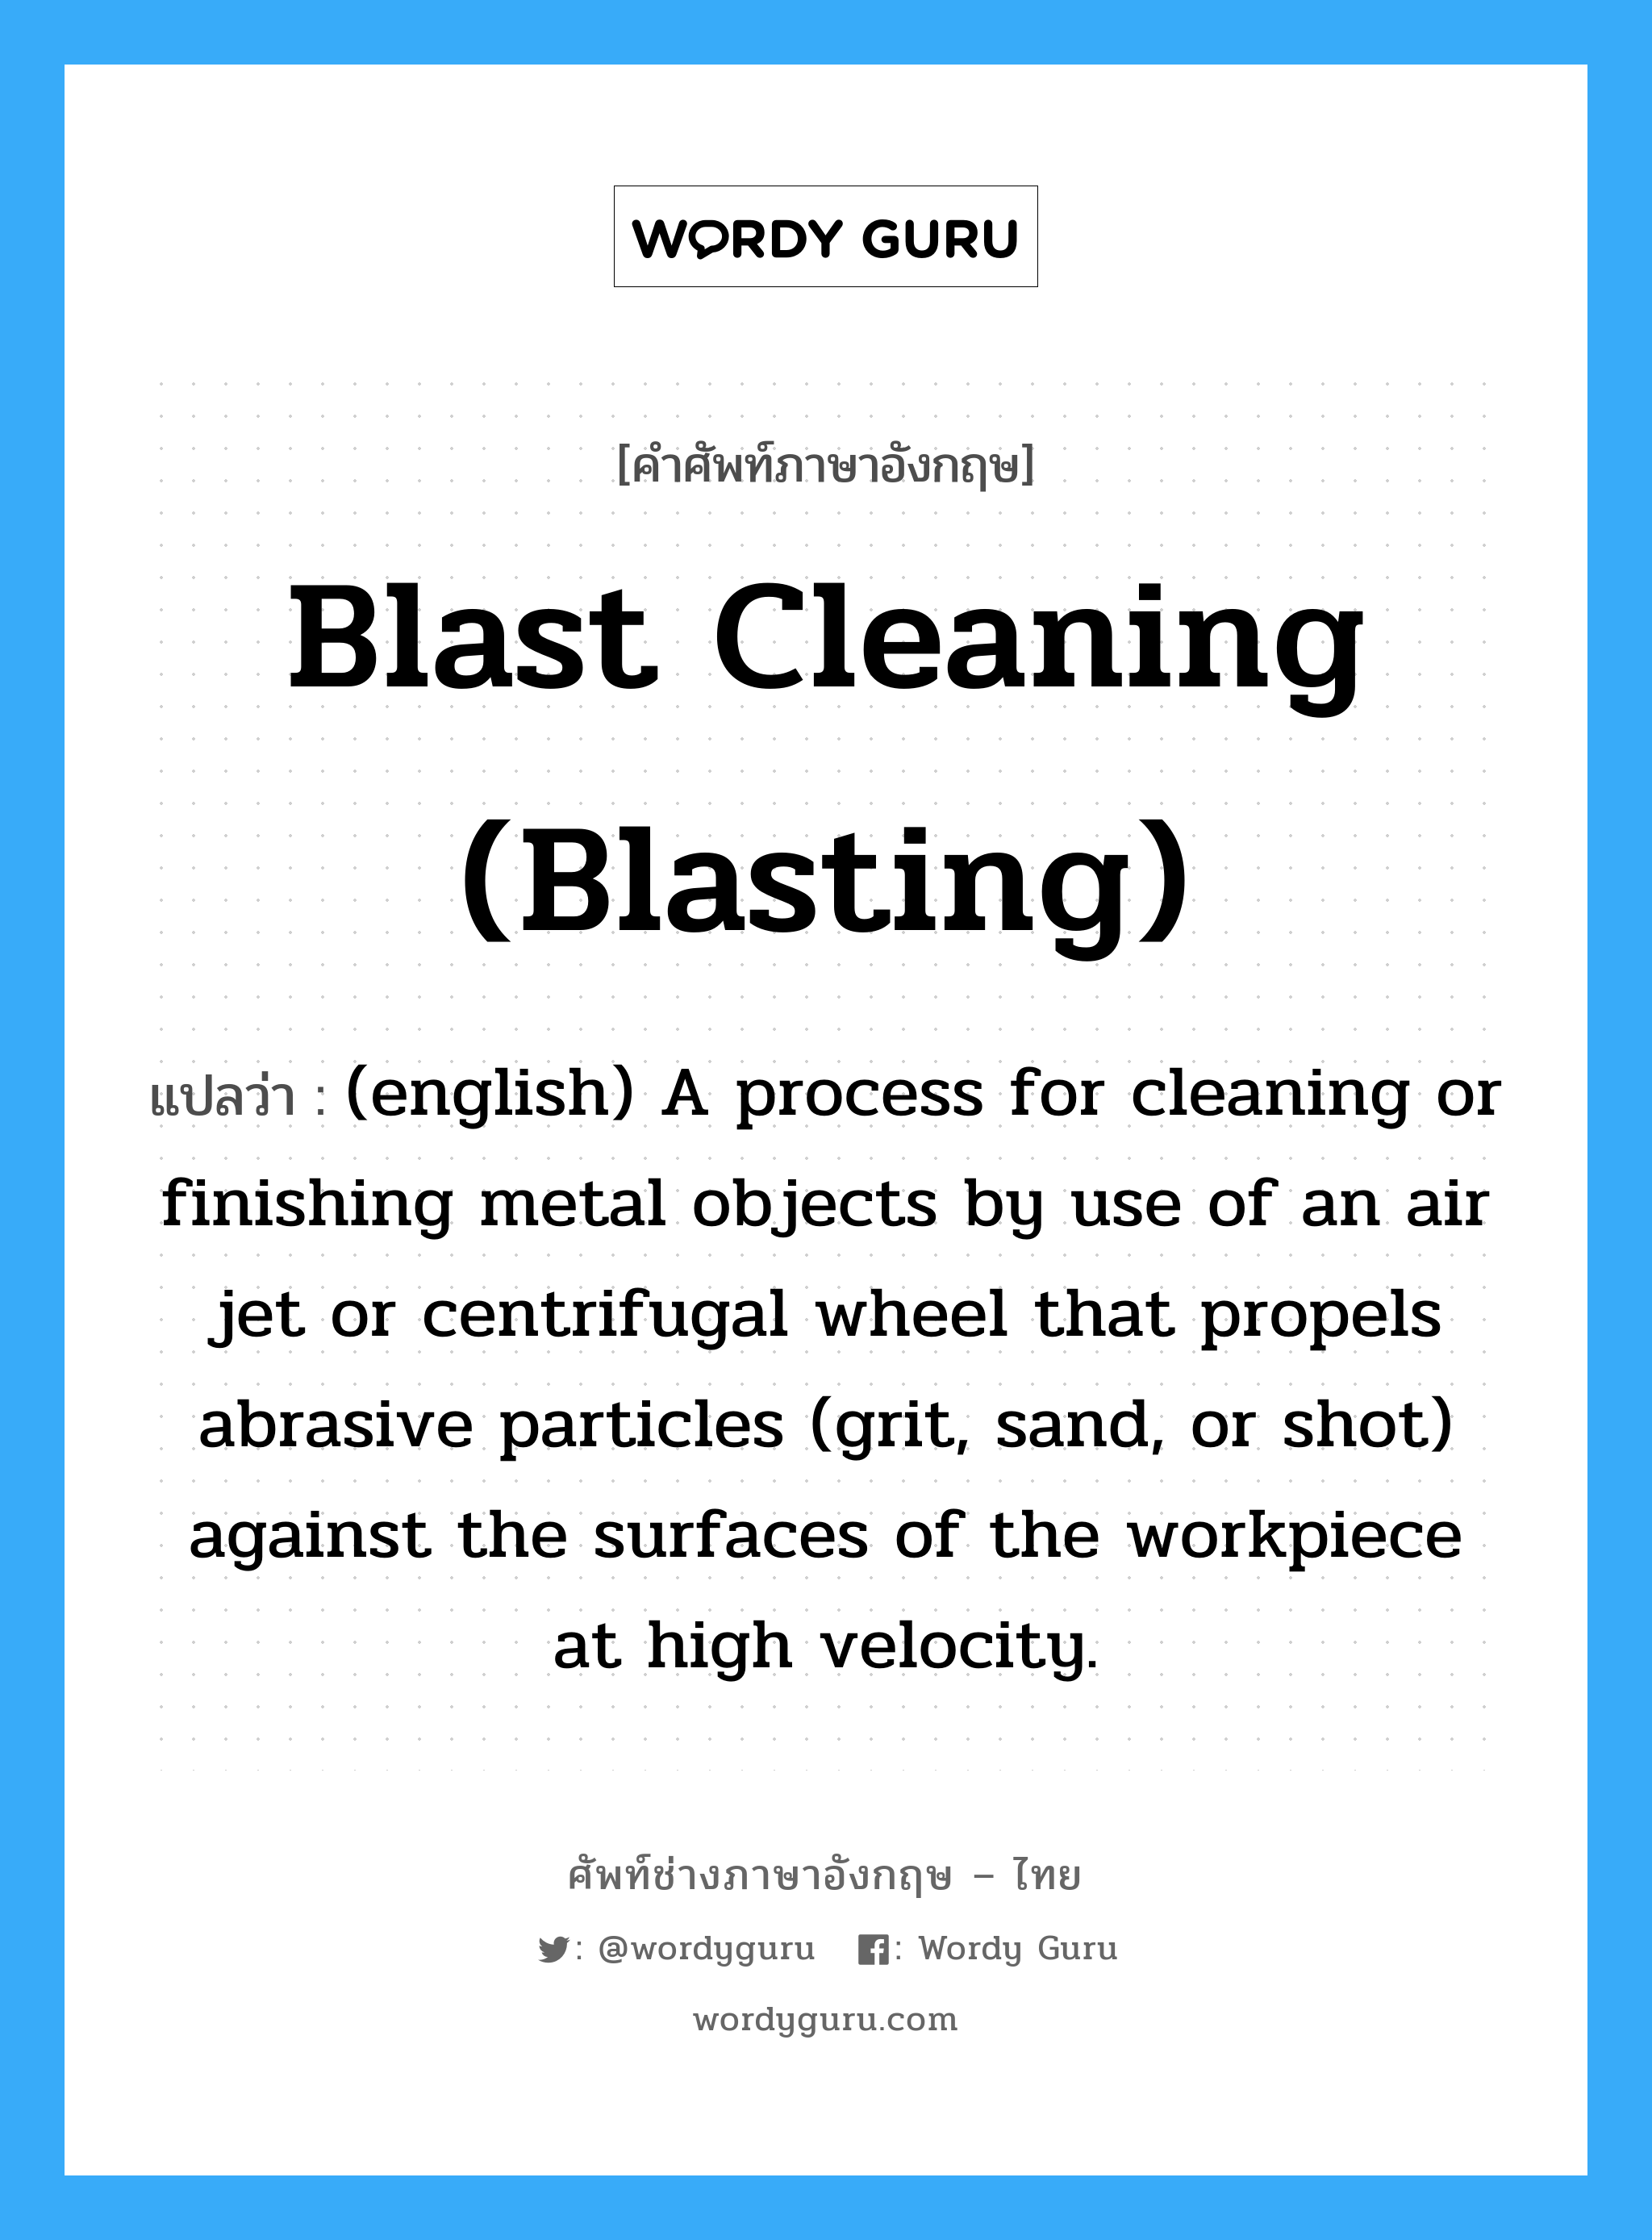 (english) A process for cleaning or finishing metal objects by use of an air blast or centrifugal wheel that throws abrasive particles against the surface of the work pieces. Small, irregular particles of steel or iron are used as the abrasive in grit blasting, and steel or iron balls in shot blasting. ภาษาอังกฤษ?, คำศัพท์ช่างภาษาอังกฤษ - ไทย (english) A process for cleaning or finishing metal objects by use of an air jet or centrifugal wheel that propels abrasive particles (grit, sand, or shot) against the surfaces of the workpiece at high velocity. คำศัพท์ภาษาอังกฤษ (english) A process for cleaning or finishing metal objects by use of an air jet or centrifugal wheel that propels abrasive particles (grit, sand, or shot) against the surfaces of the workpiece at high velocity. แปลว่า Blast Cleaning (blasting)